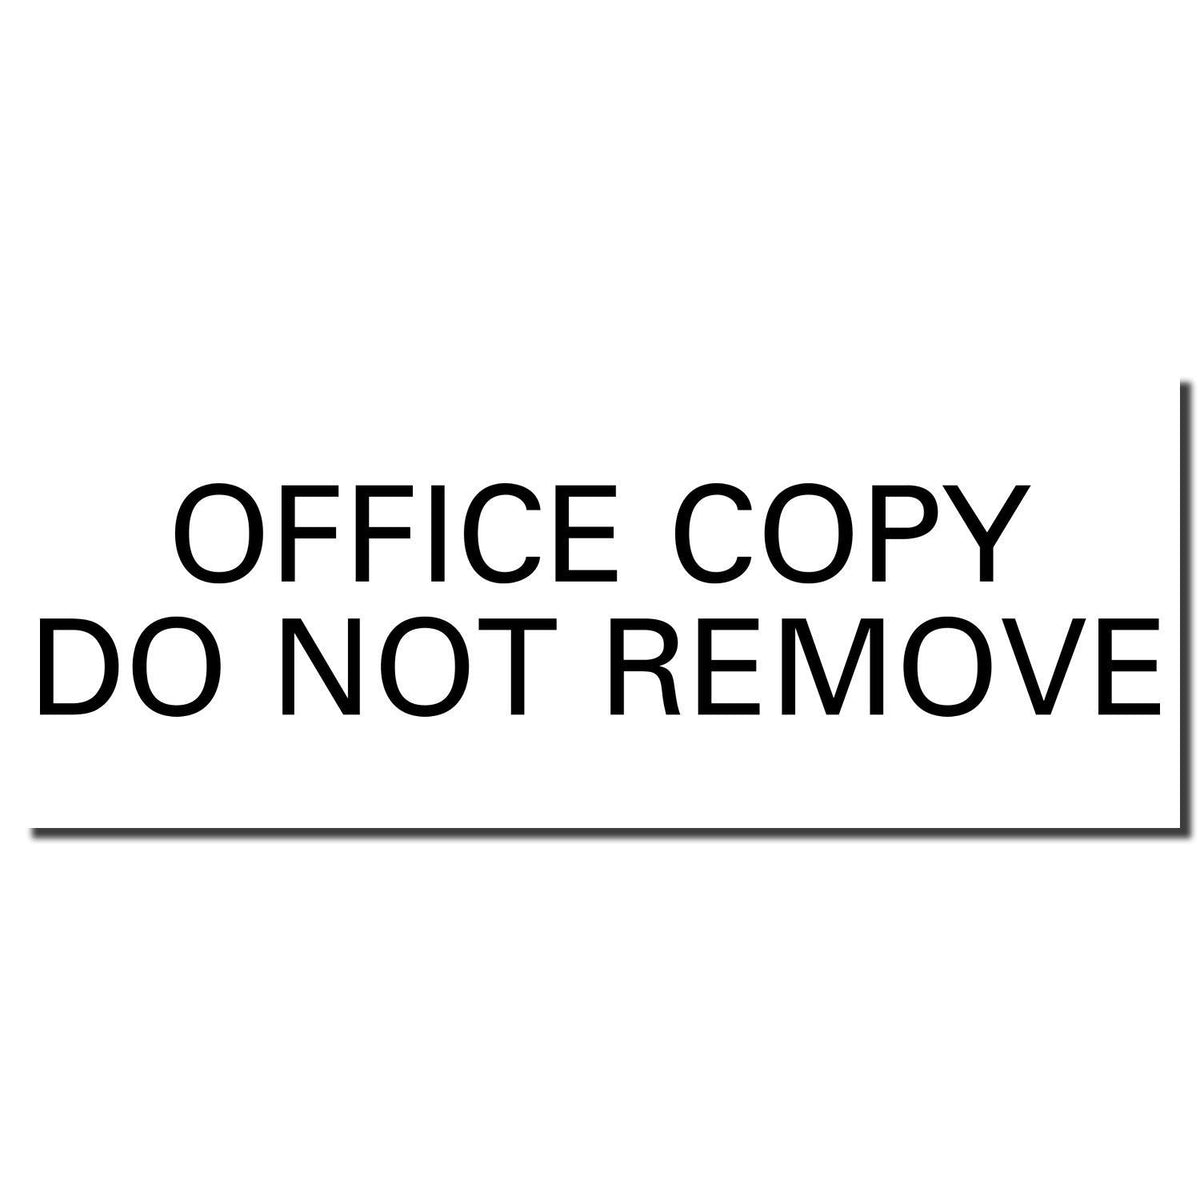 Large Self-Inking Office Copy Do Not Remove Stamp - Engineer Seal Stamps - Brand_Trodat, Impression Size_Large, Stamp Type_Self-Inking Stamp, Type of Use_General, Type of Use_Office, Type of Use_Professional